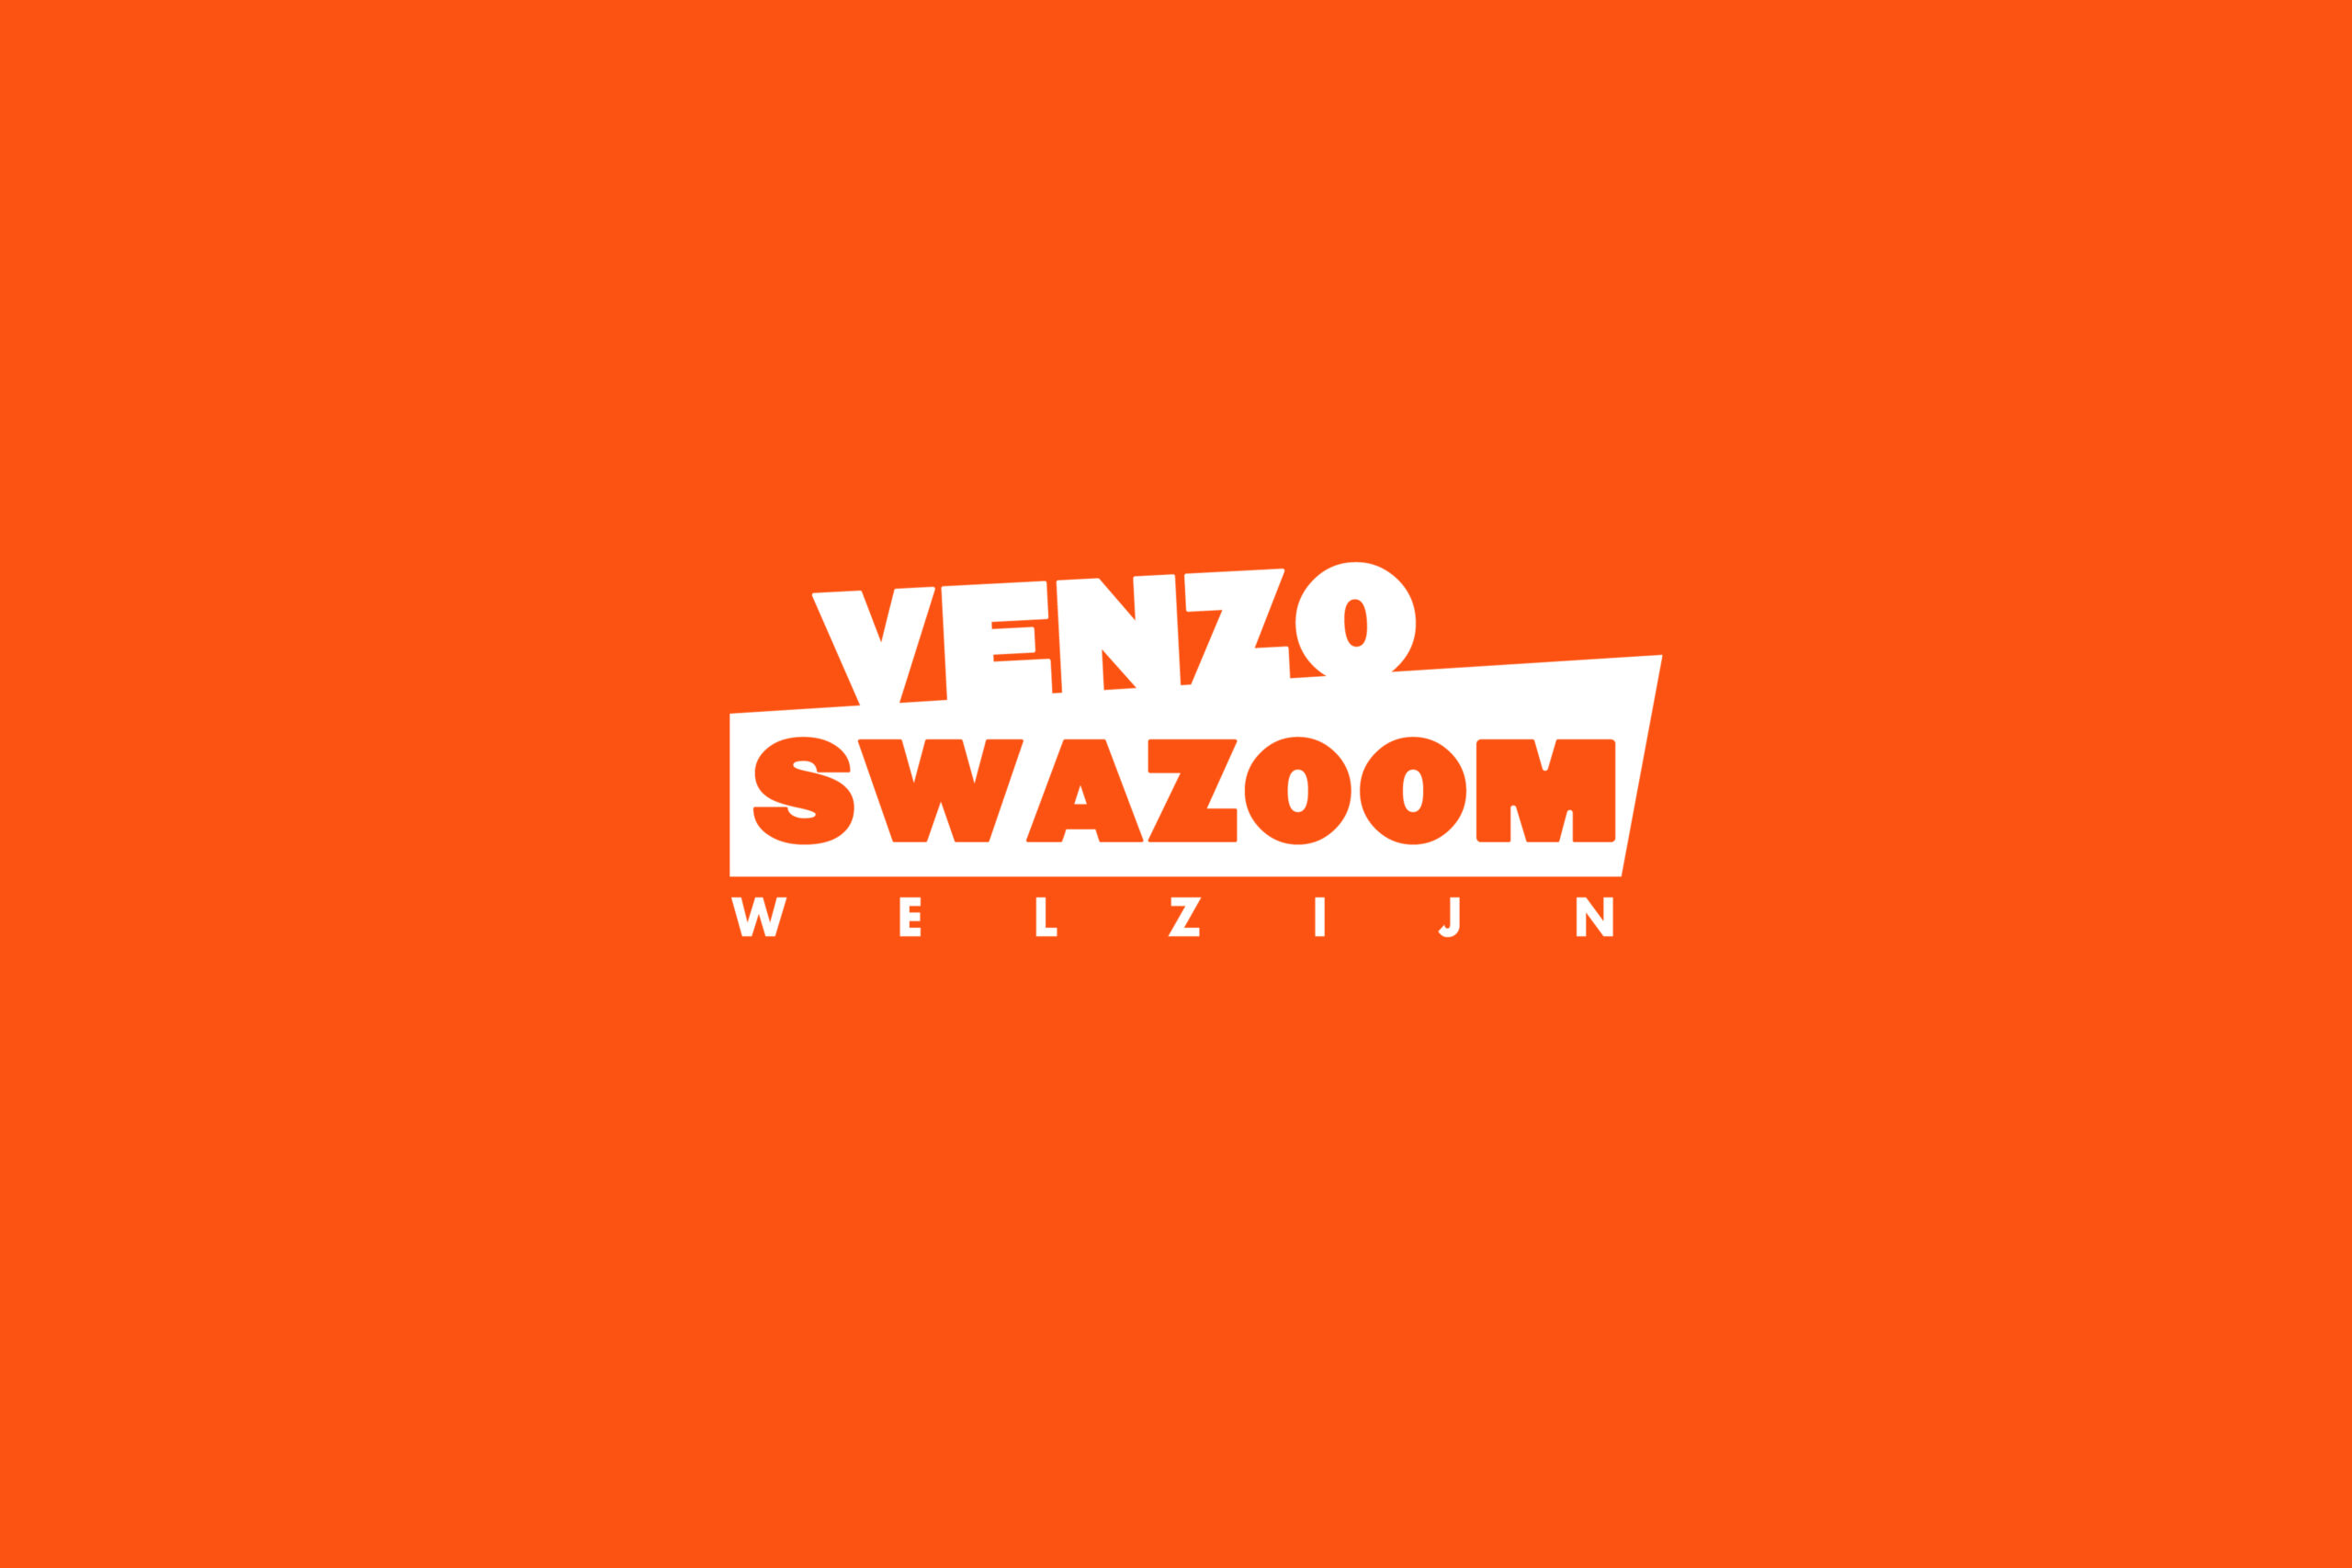 Venzoswazoomwelzijn 1200 by think and load